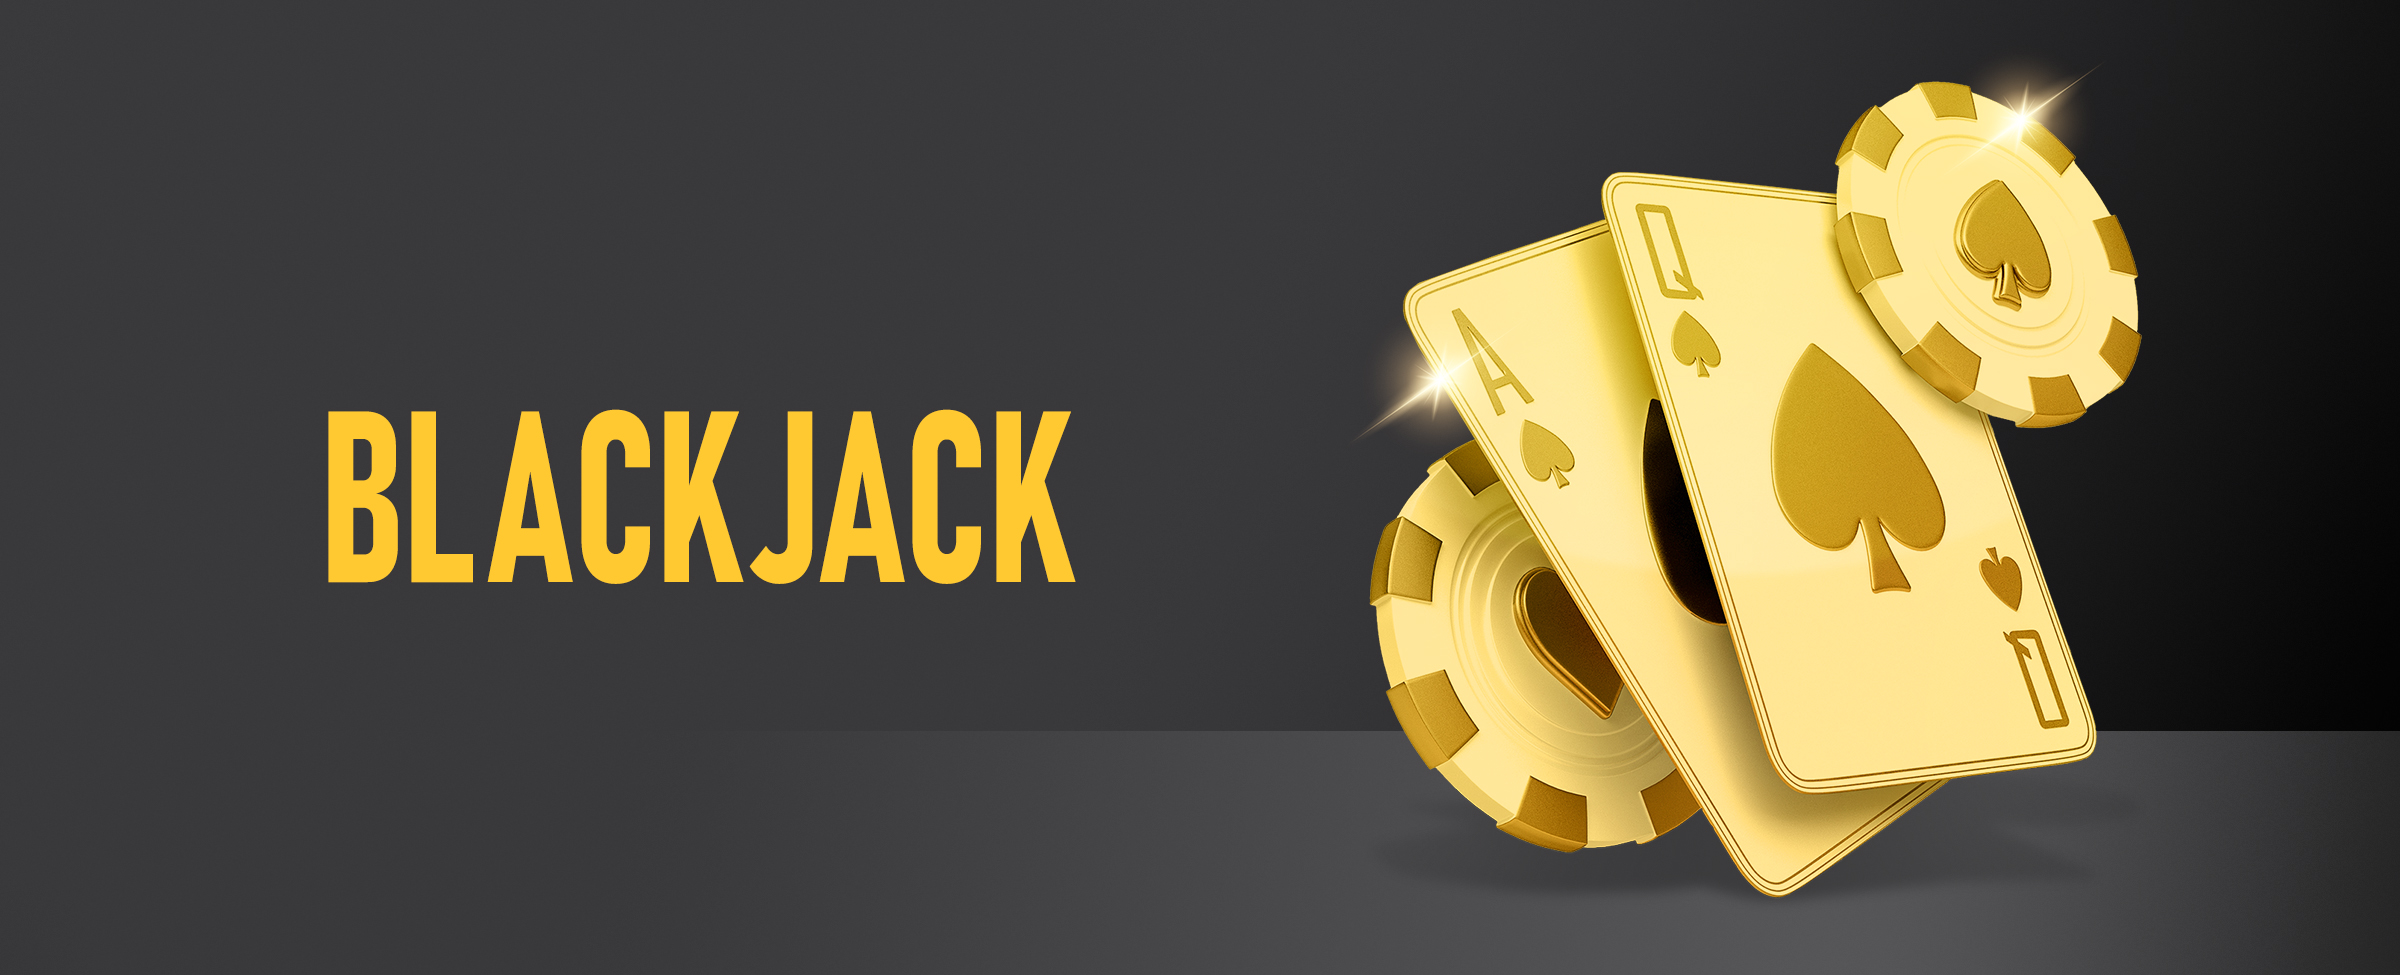 Gold poker cards and casino chips sit next to the words ‘Blackjack’, set against a black background.